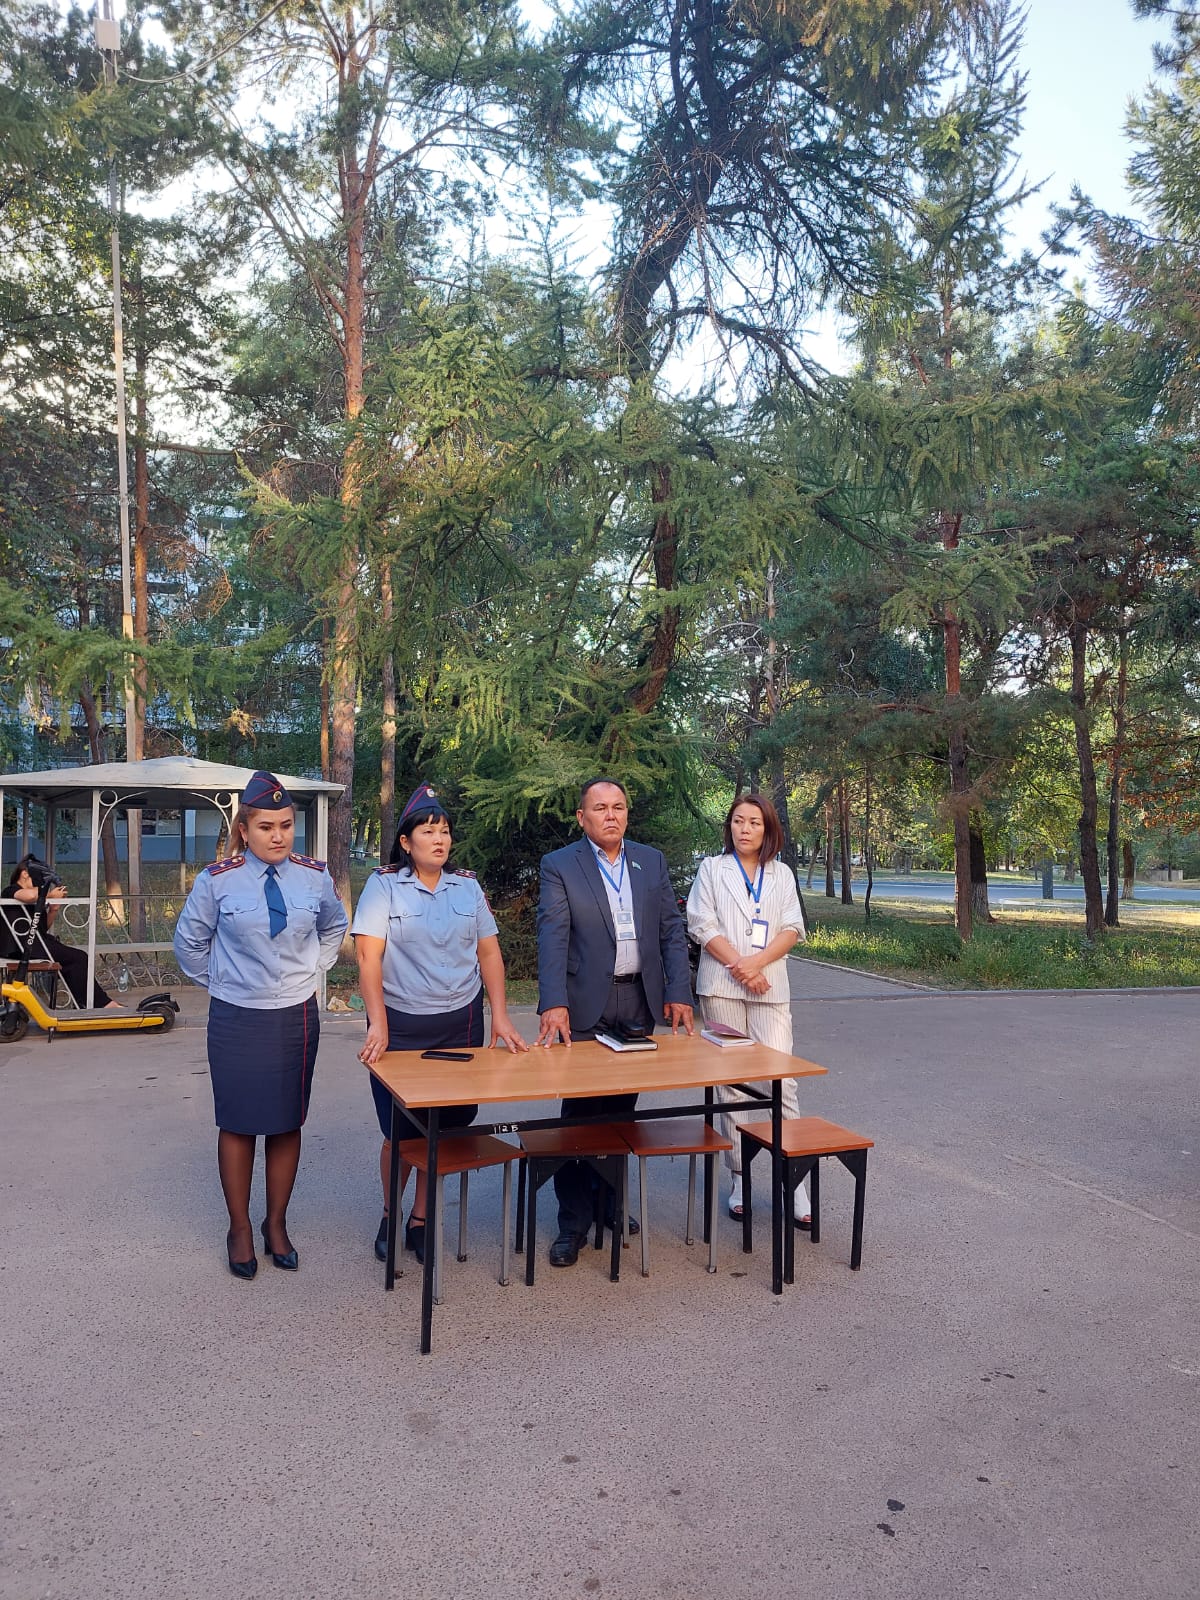 THE RULES OF RESIDENCE ON THE KAZNU CAMPUS HAVE BEEN EXPLAINED